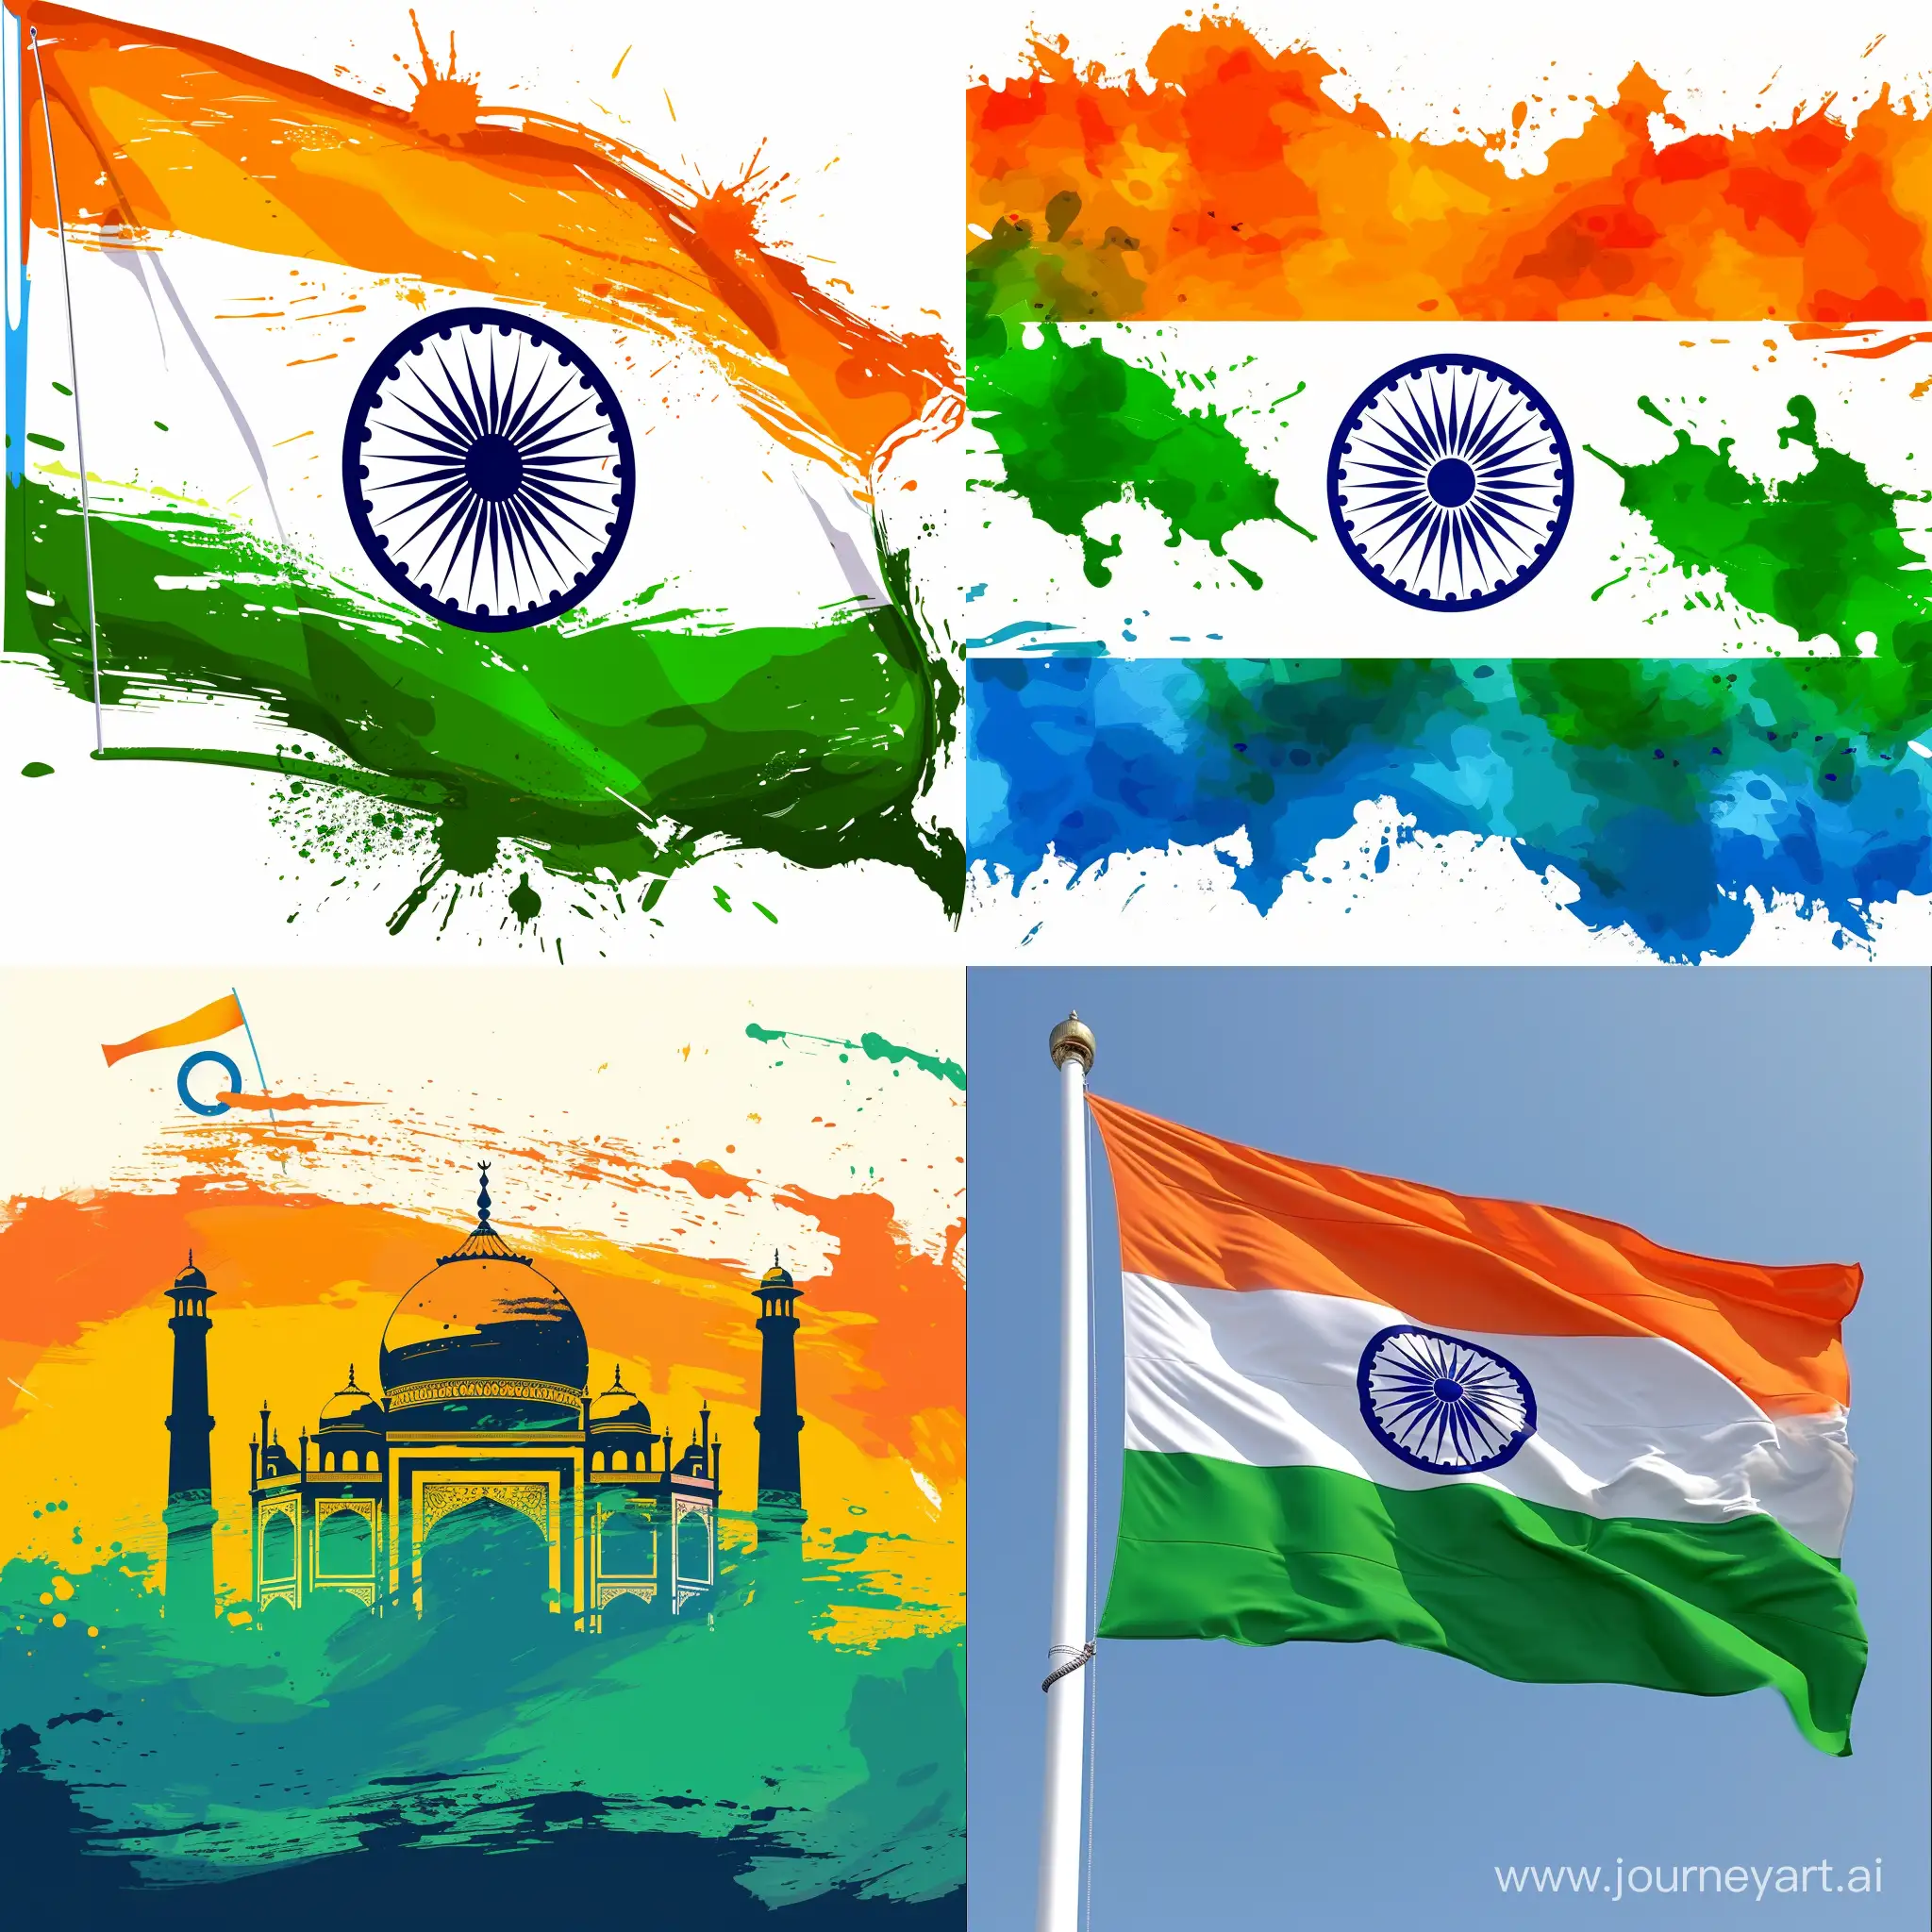 Celebrating-Republic-Day-with-Vibrant-Colors-and-Unity